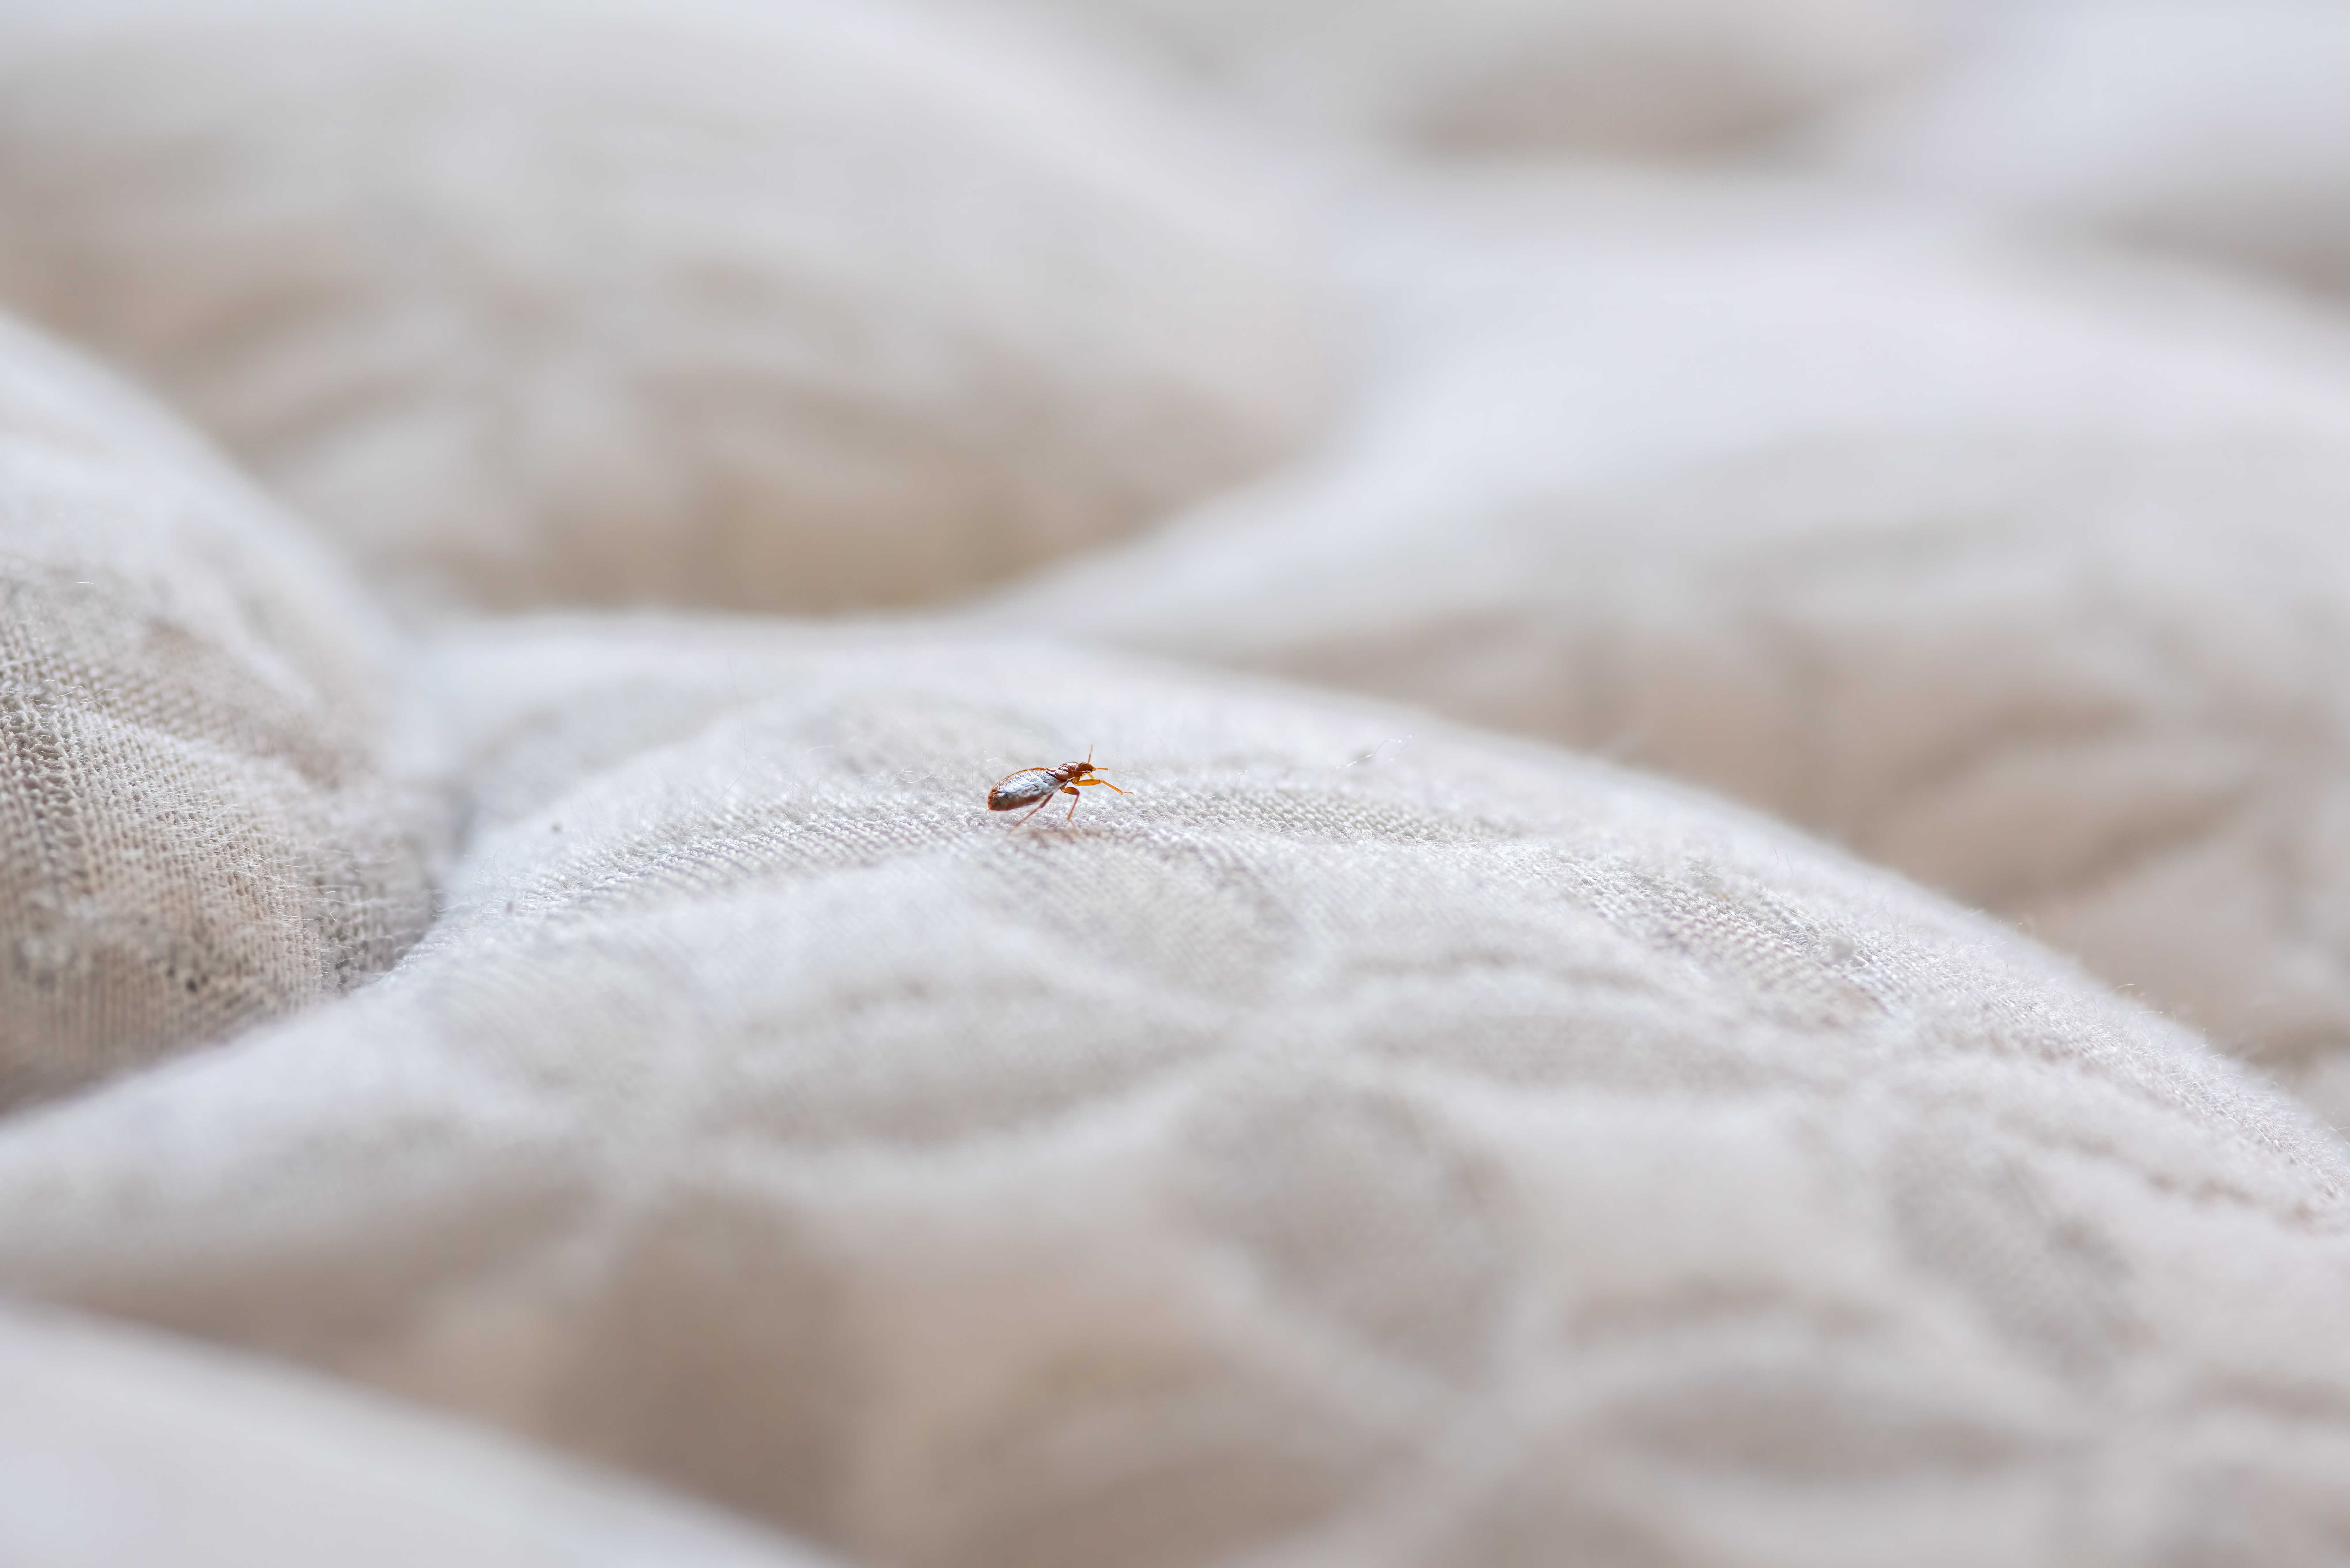 A bed bug on a bed - GGA Pest Management provides bed bug control in Hillsboro, TX.